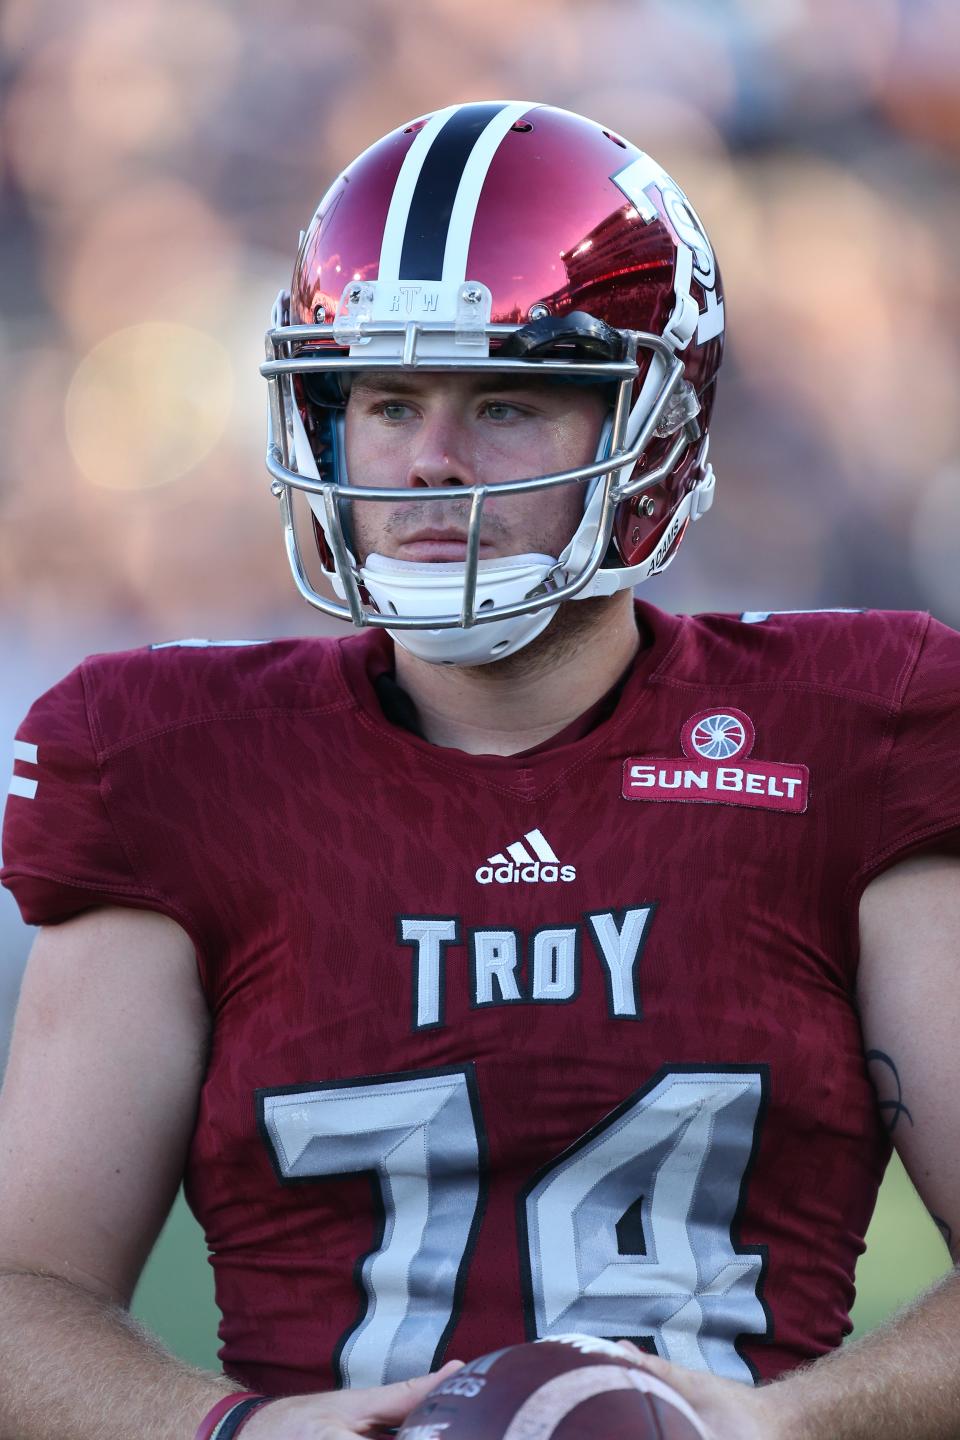 Cameron Kaye, a redshirt junior, has been the starting long snapper at Troy University for three years.